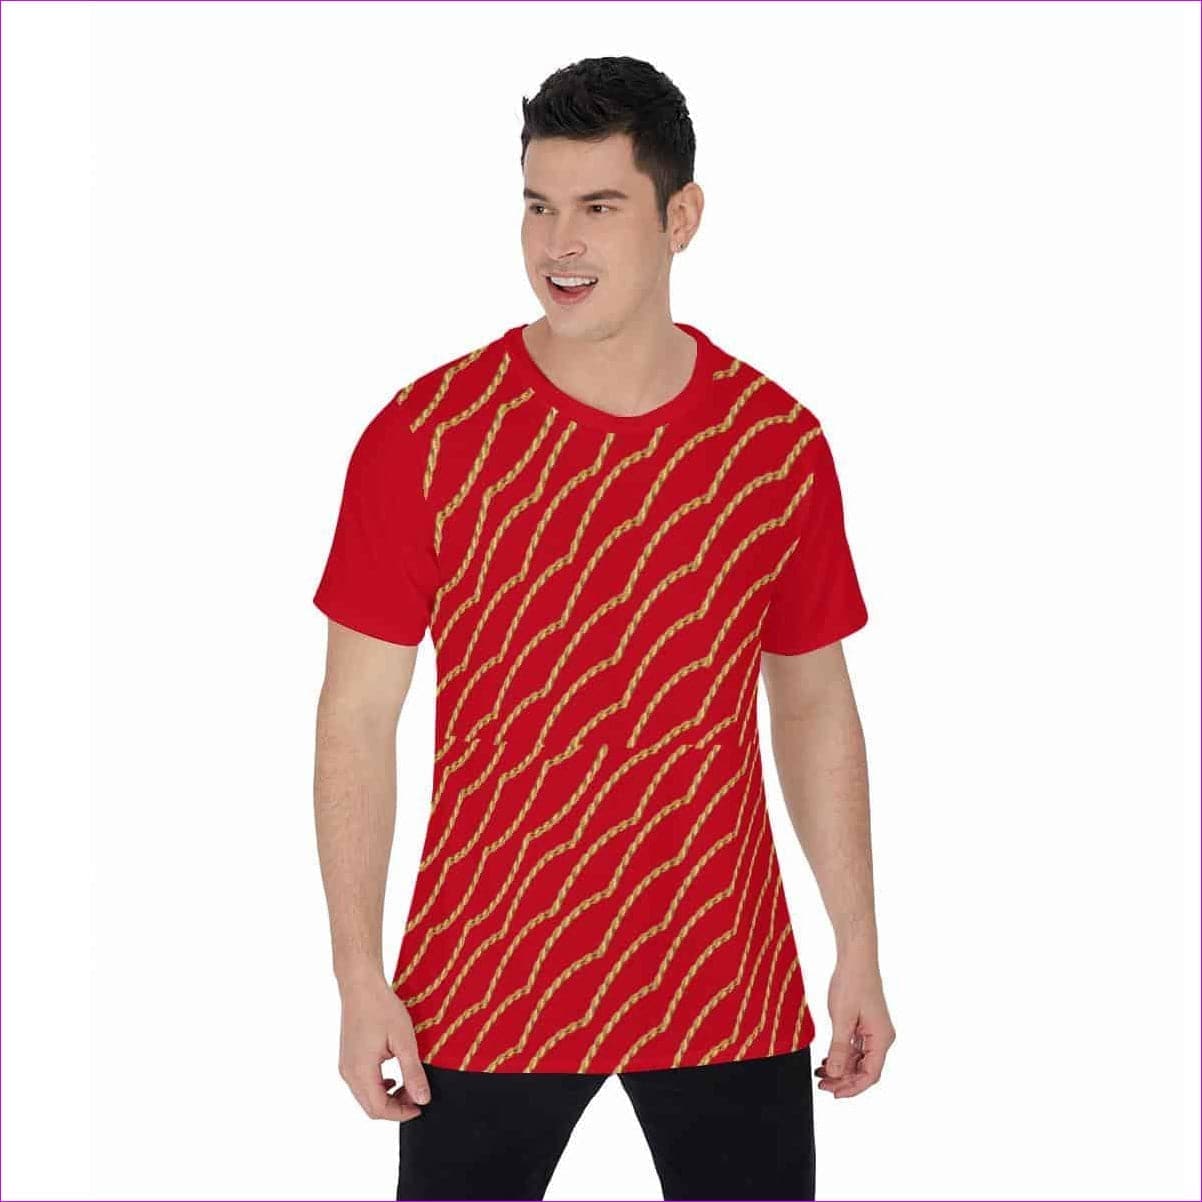 Chained Men's O-Neck T-Shirt - Red - Men's T-Shirts at TFC&H Co.